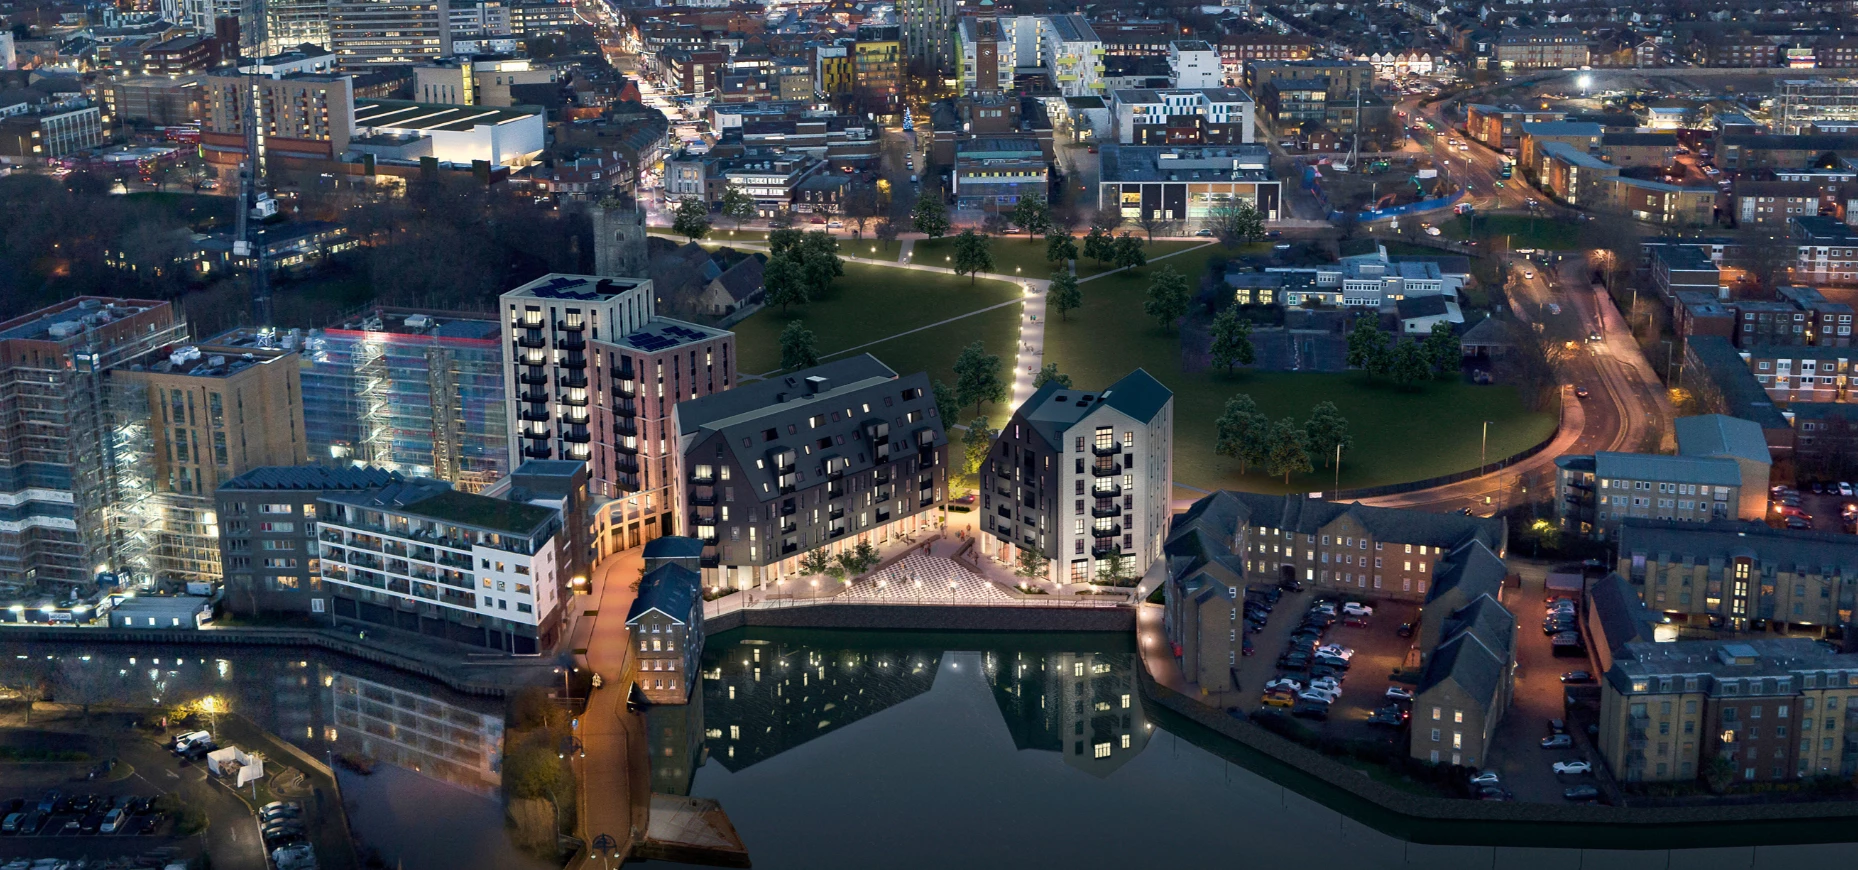 CG image of what the Town Quay development in Barking could look like.